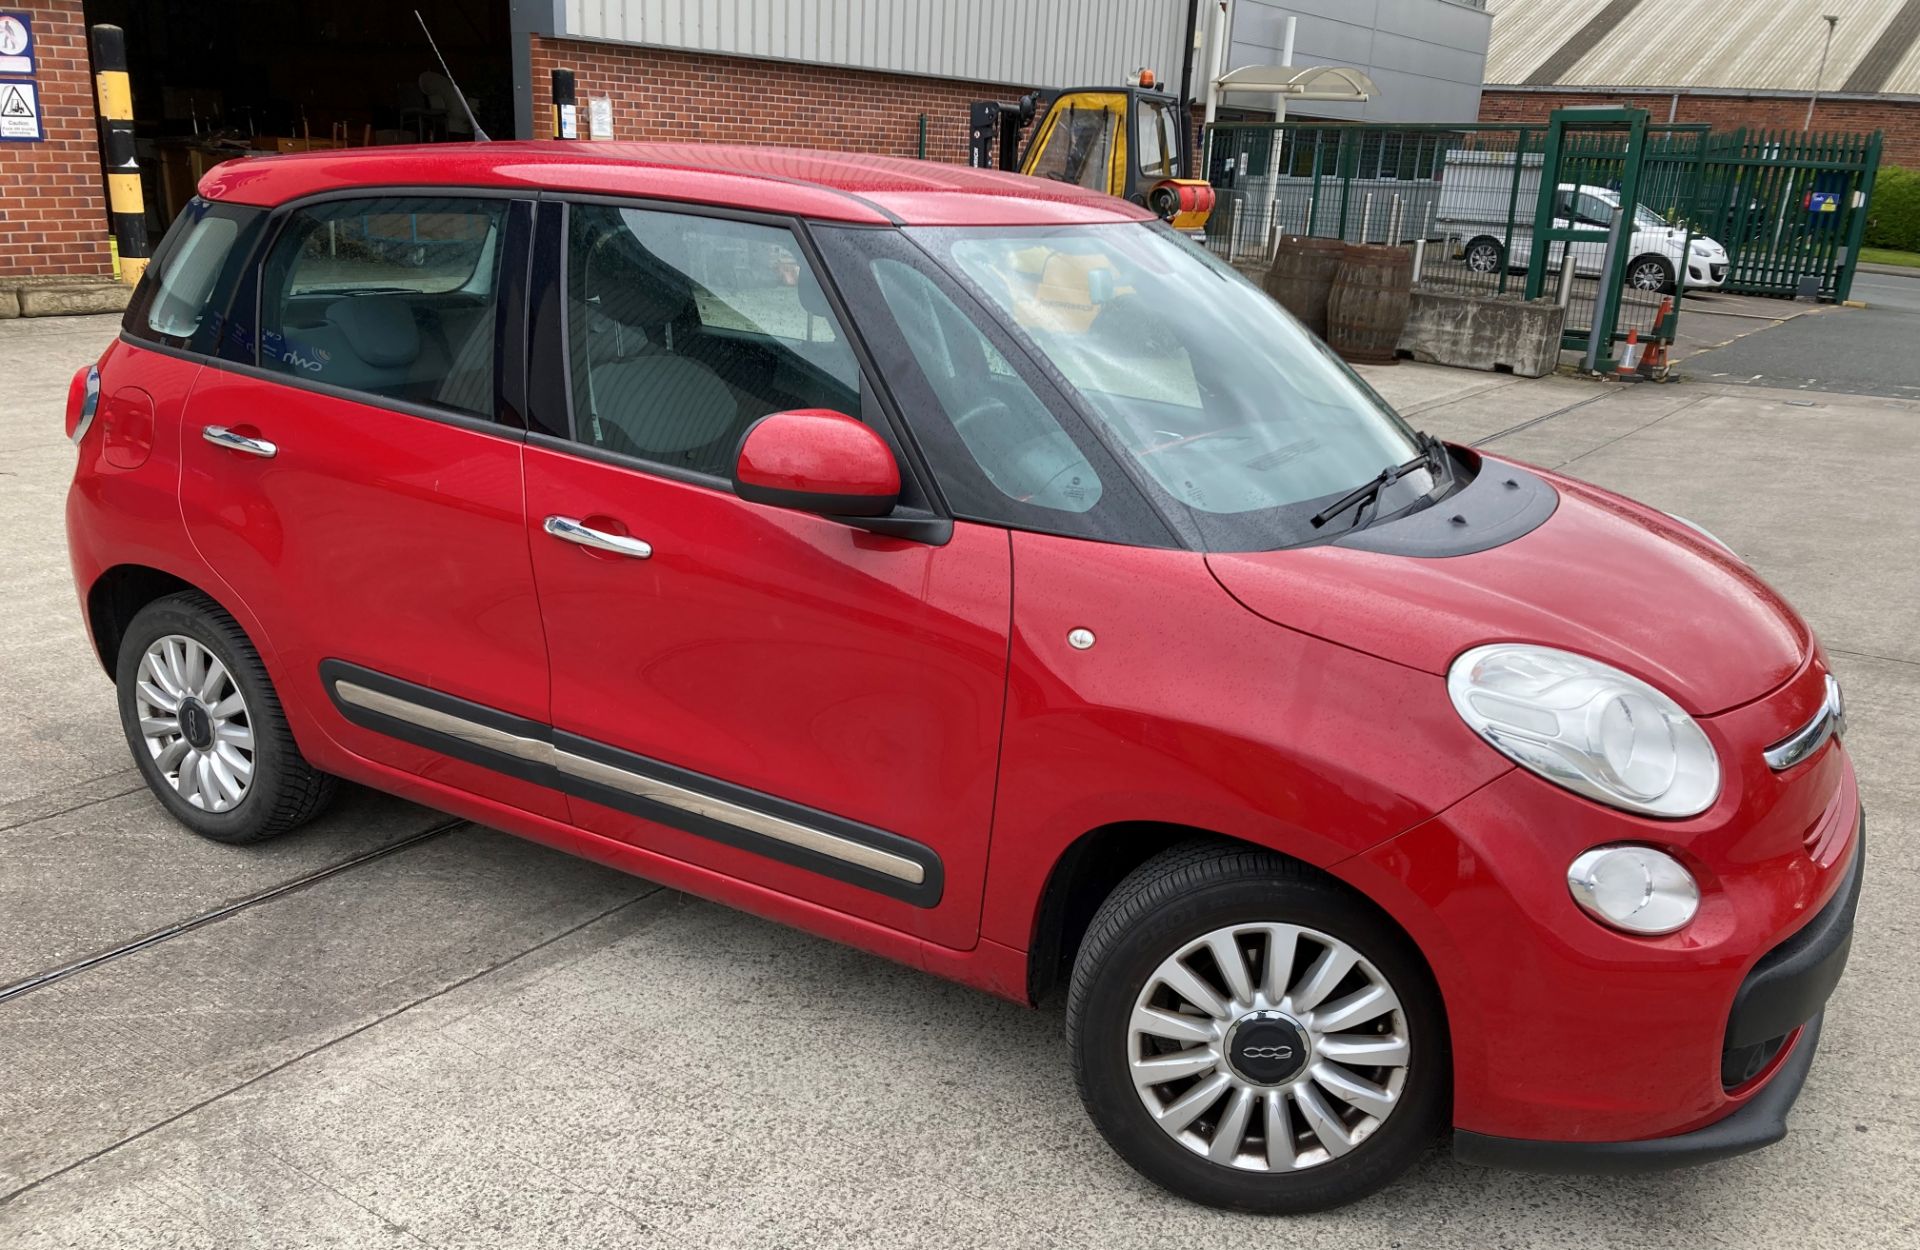 FIAT 500L POP STAR MULTI-JET 1.2 MPV - DIESEL - RED. On the instructions of: A retained client. - Image 3 of 16